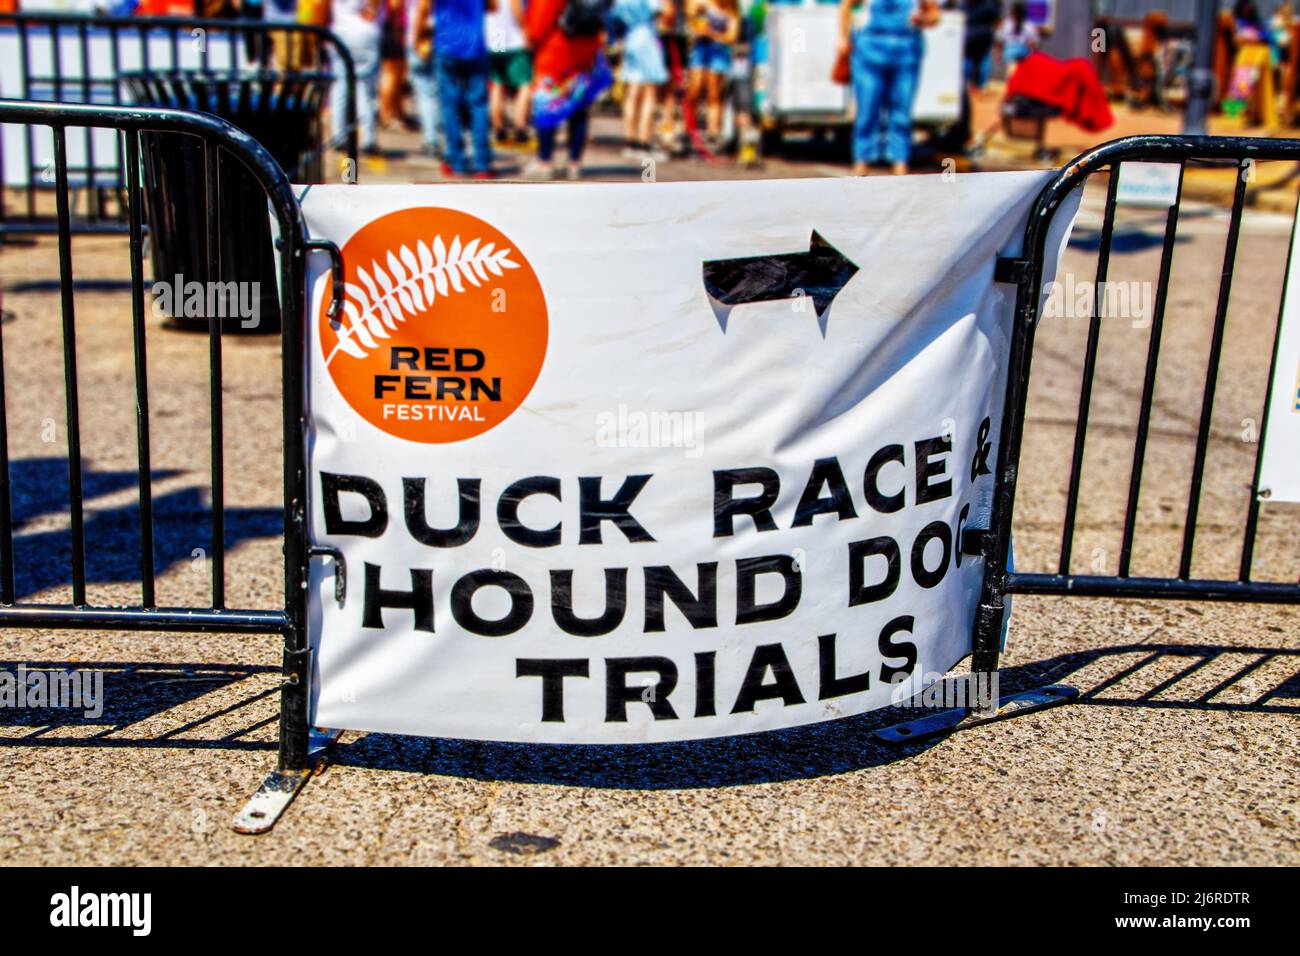 4-30-2022 Tahlequah OK - Vinyl banner sign at Red Fern Festival announces duck race and hound dog trials Stock Photo